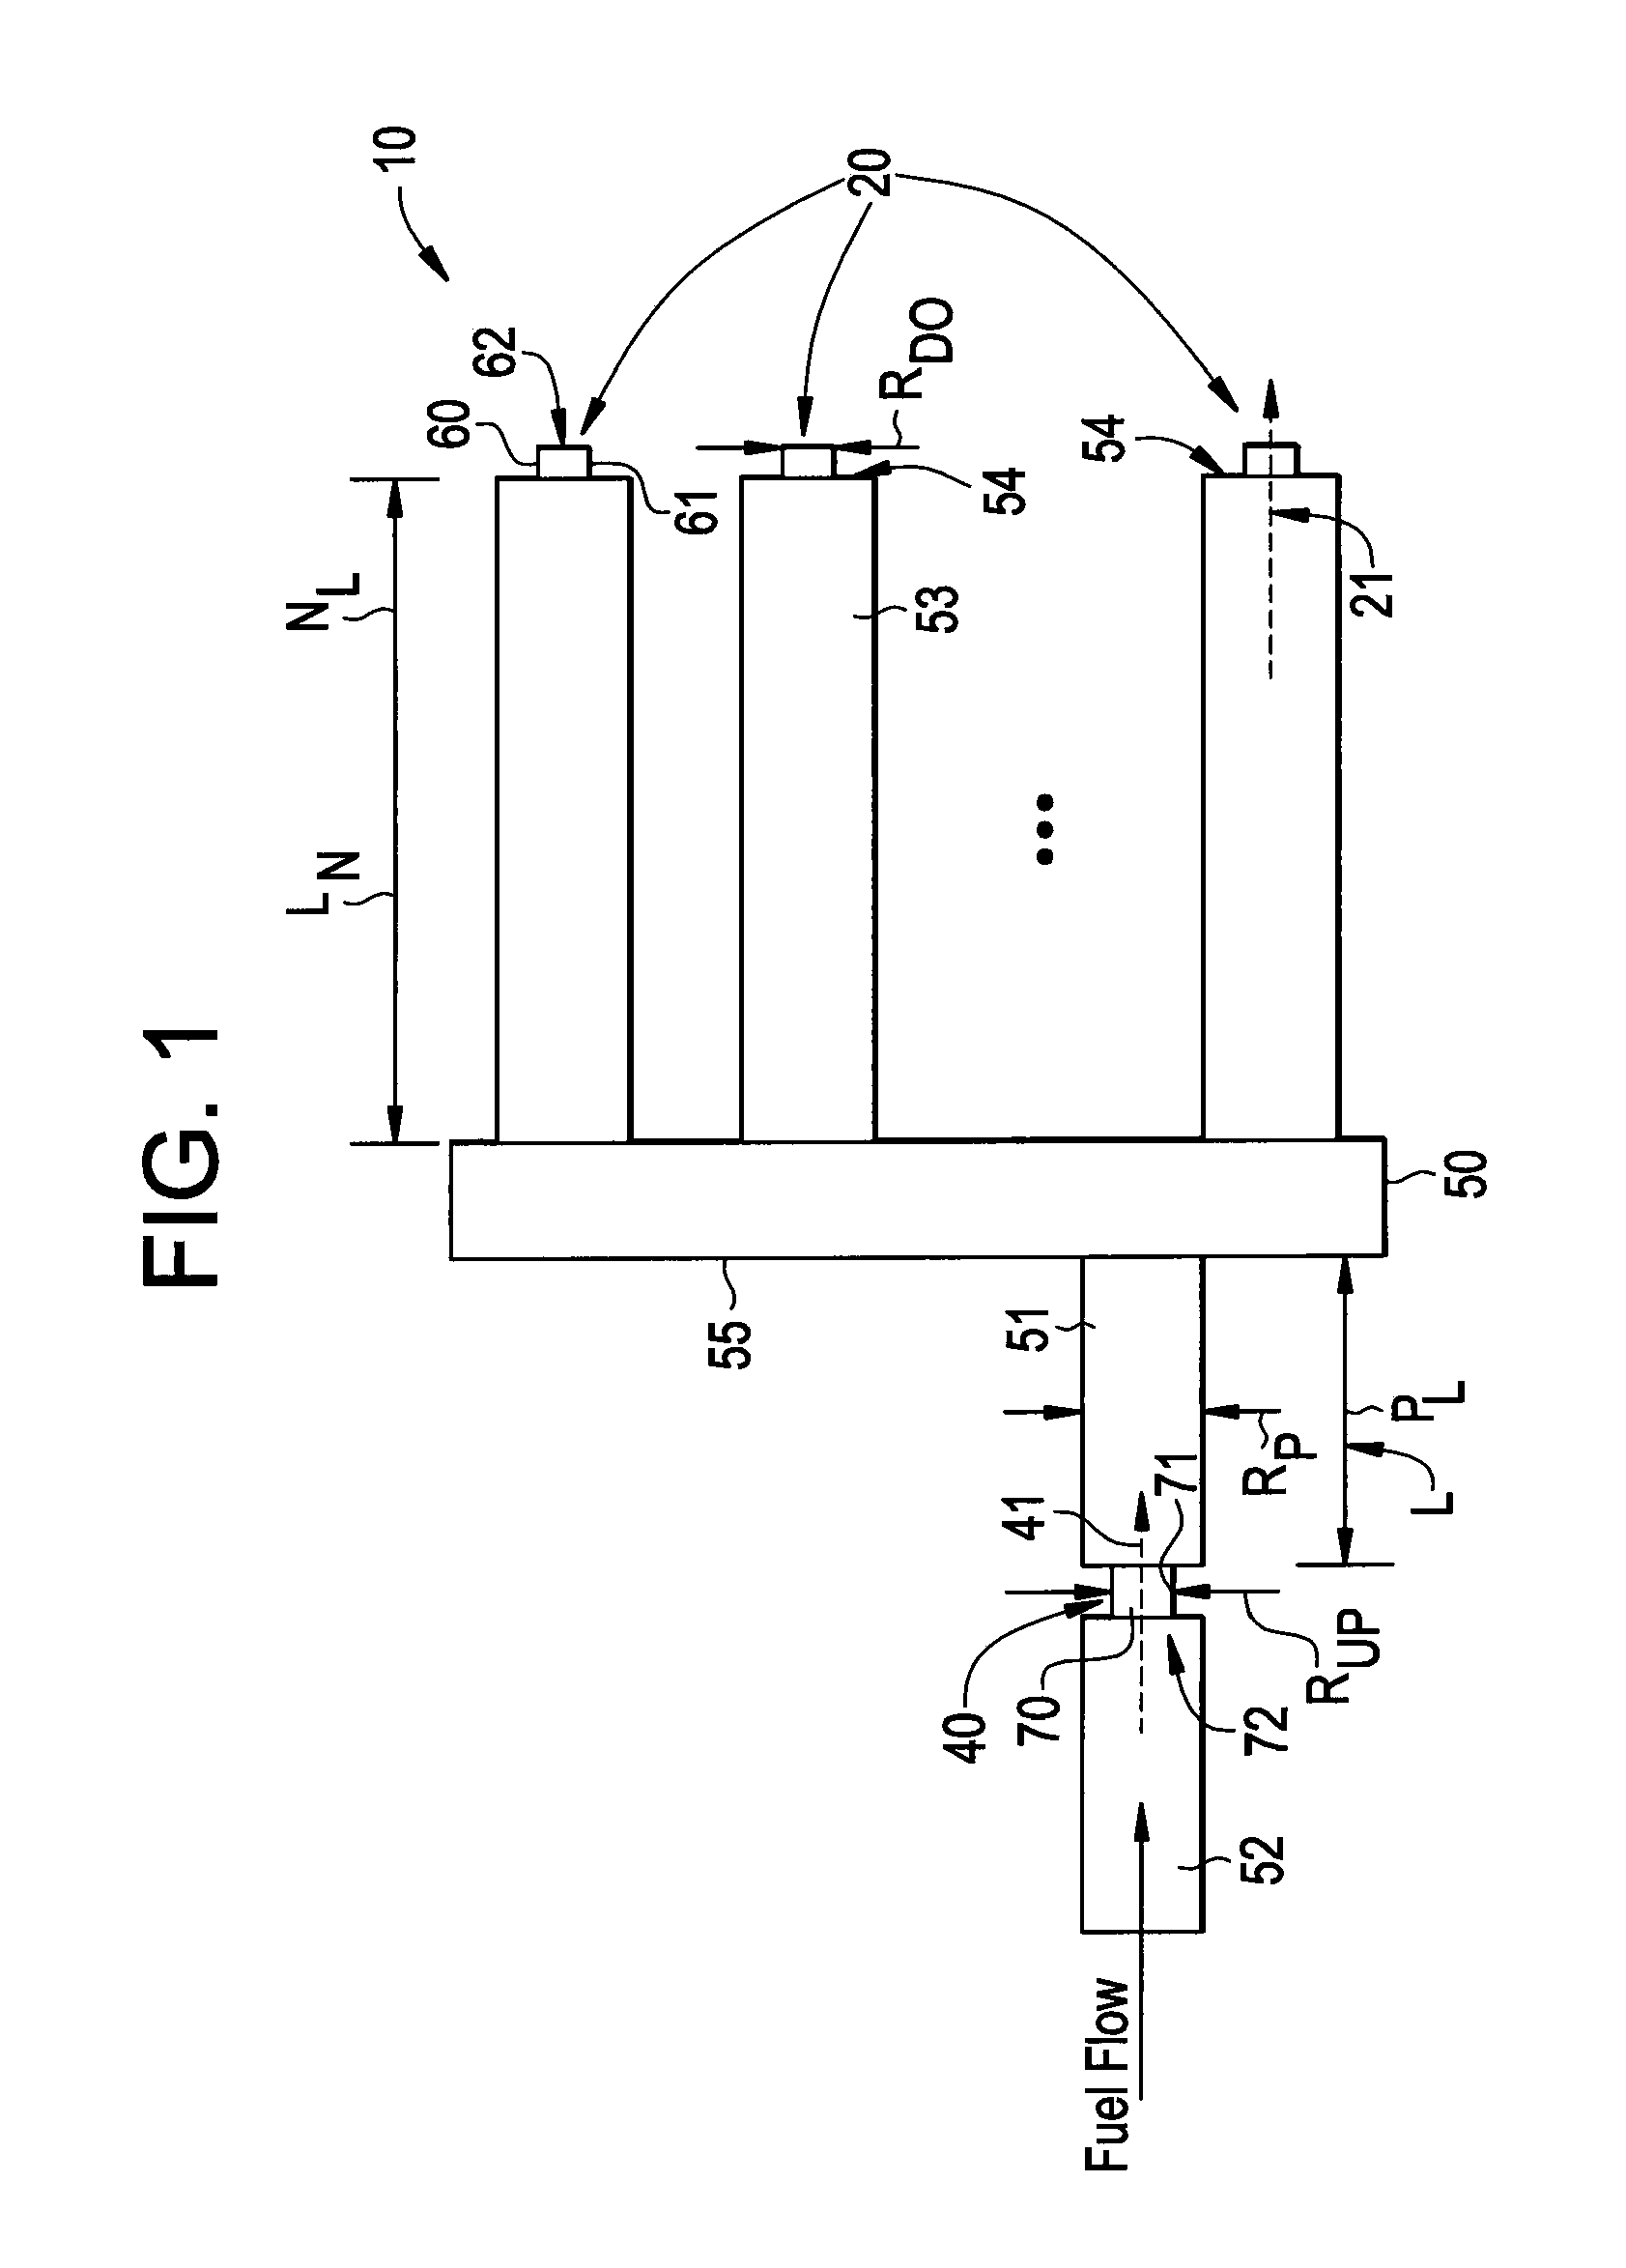 FUEL SYSTEM ACOUSTIC FEATURE TO MITIGATE COMBUSTION DYNAMICS FOR MULTI-NOZZLE DRY LOW Nox COMBUSTION SYSTEM AND METHOD